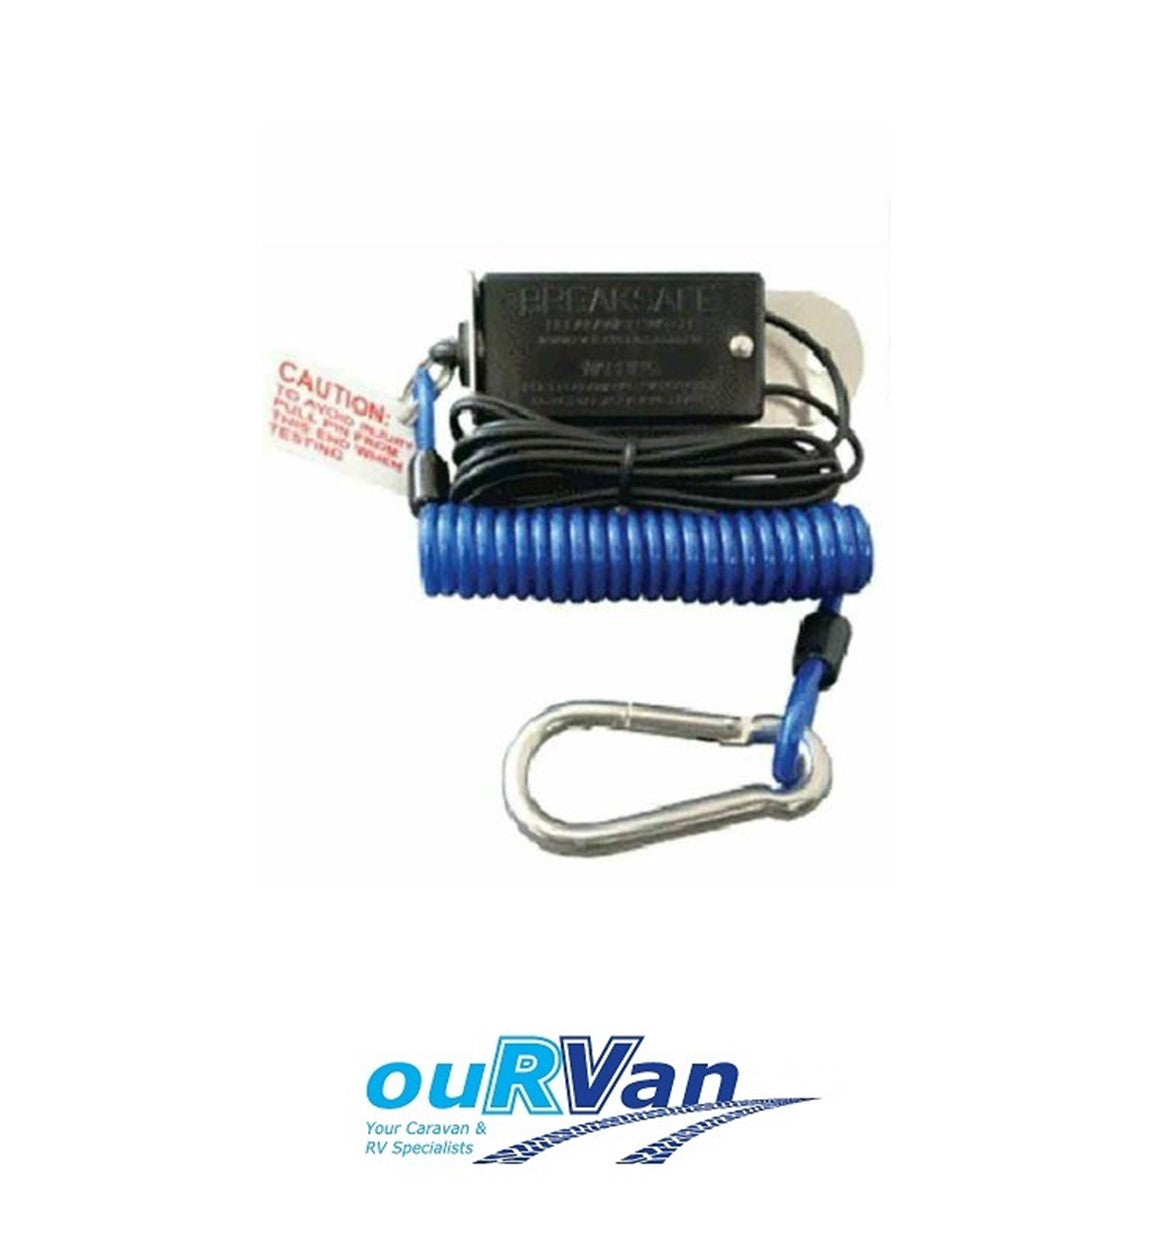 BREAKSAFE SWITCH WITH COIL CABLE FOR BREAKAWAY 6000 - CARAVAN, RV, TRAILER 5000